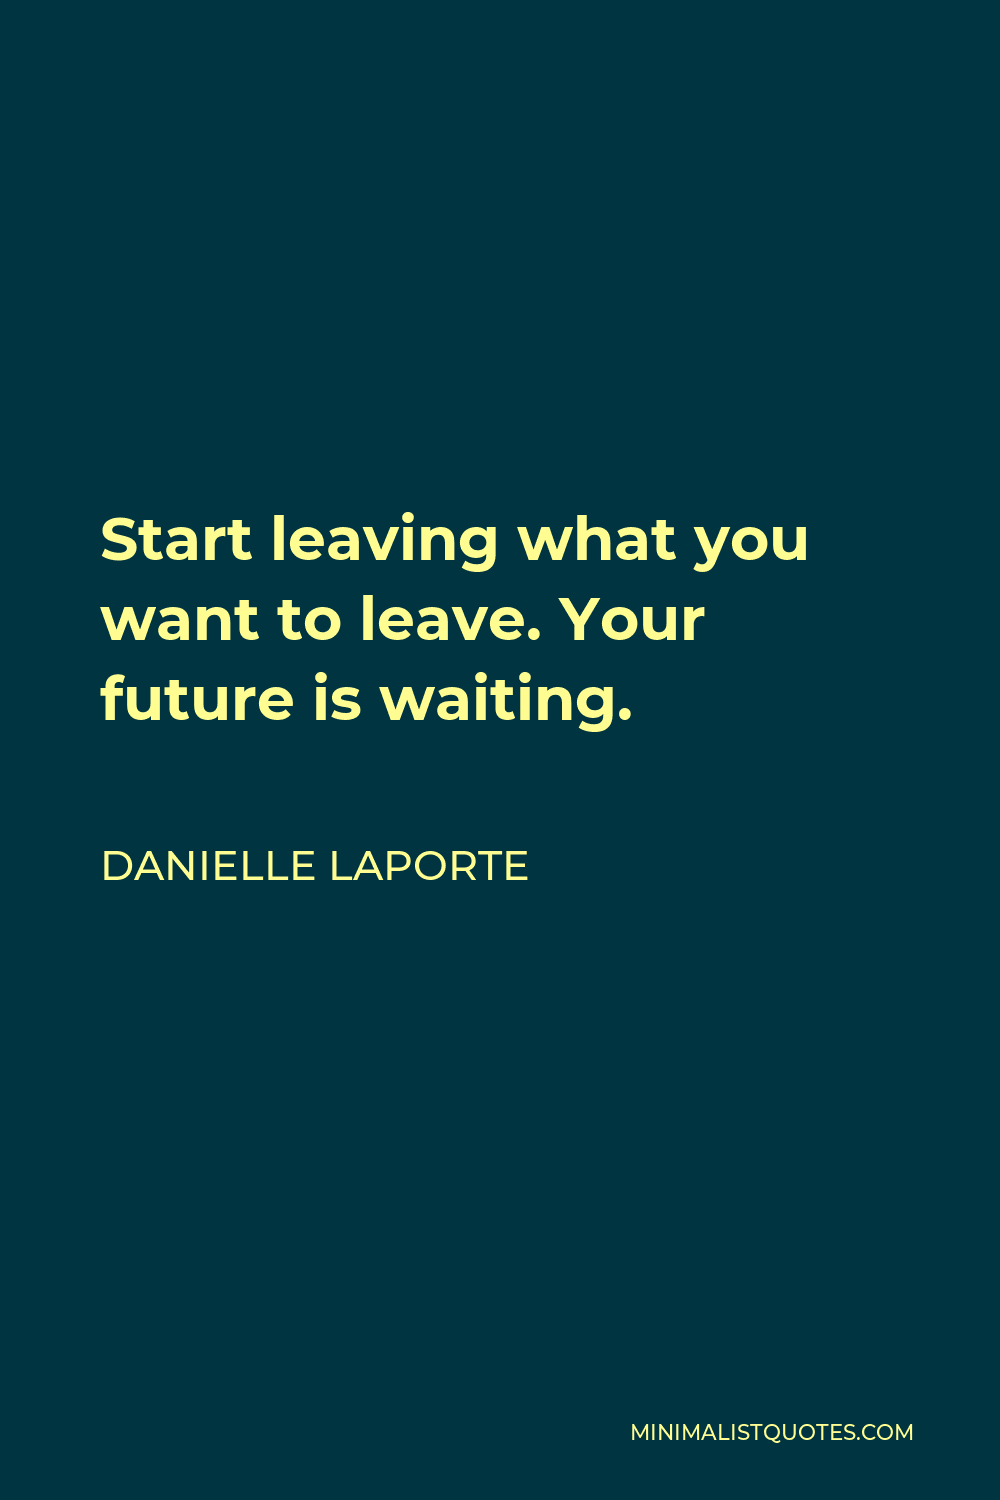 Danielle LaPorte Quote - Start leaving what you want to leave. Your future is waiting.